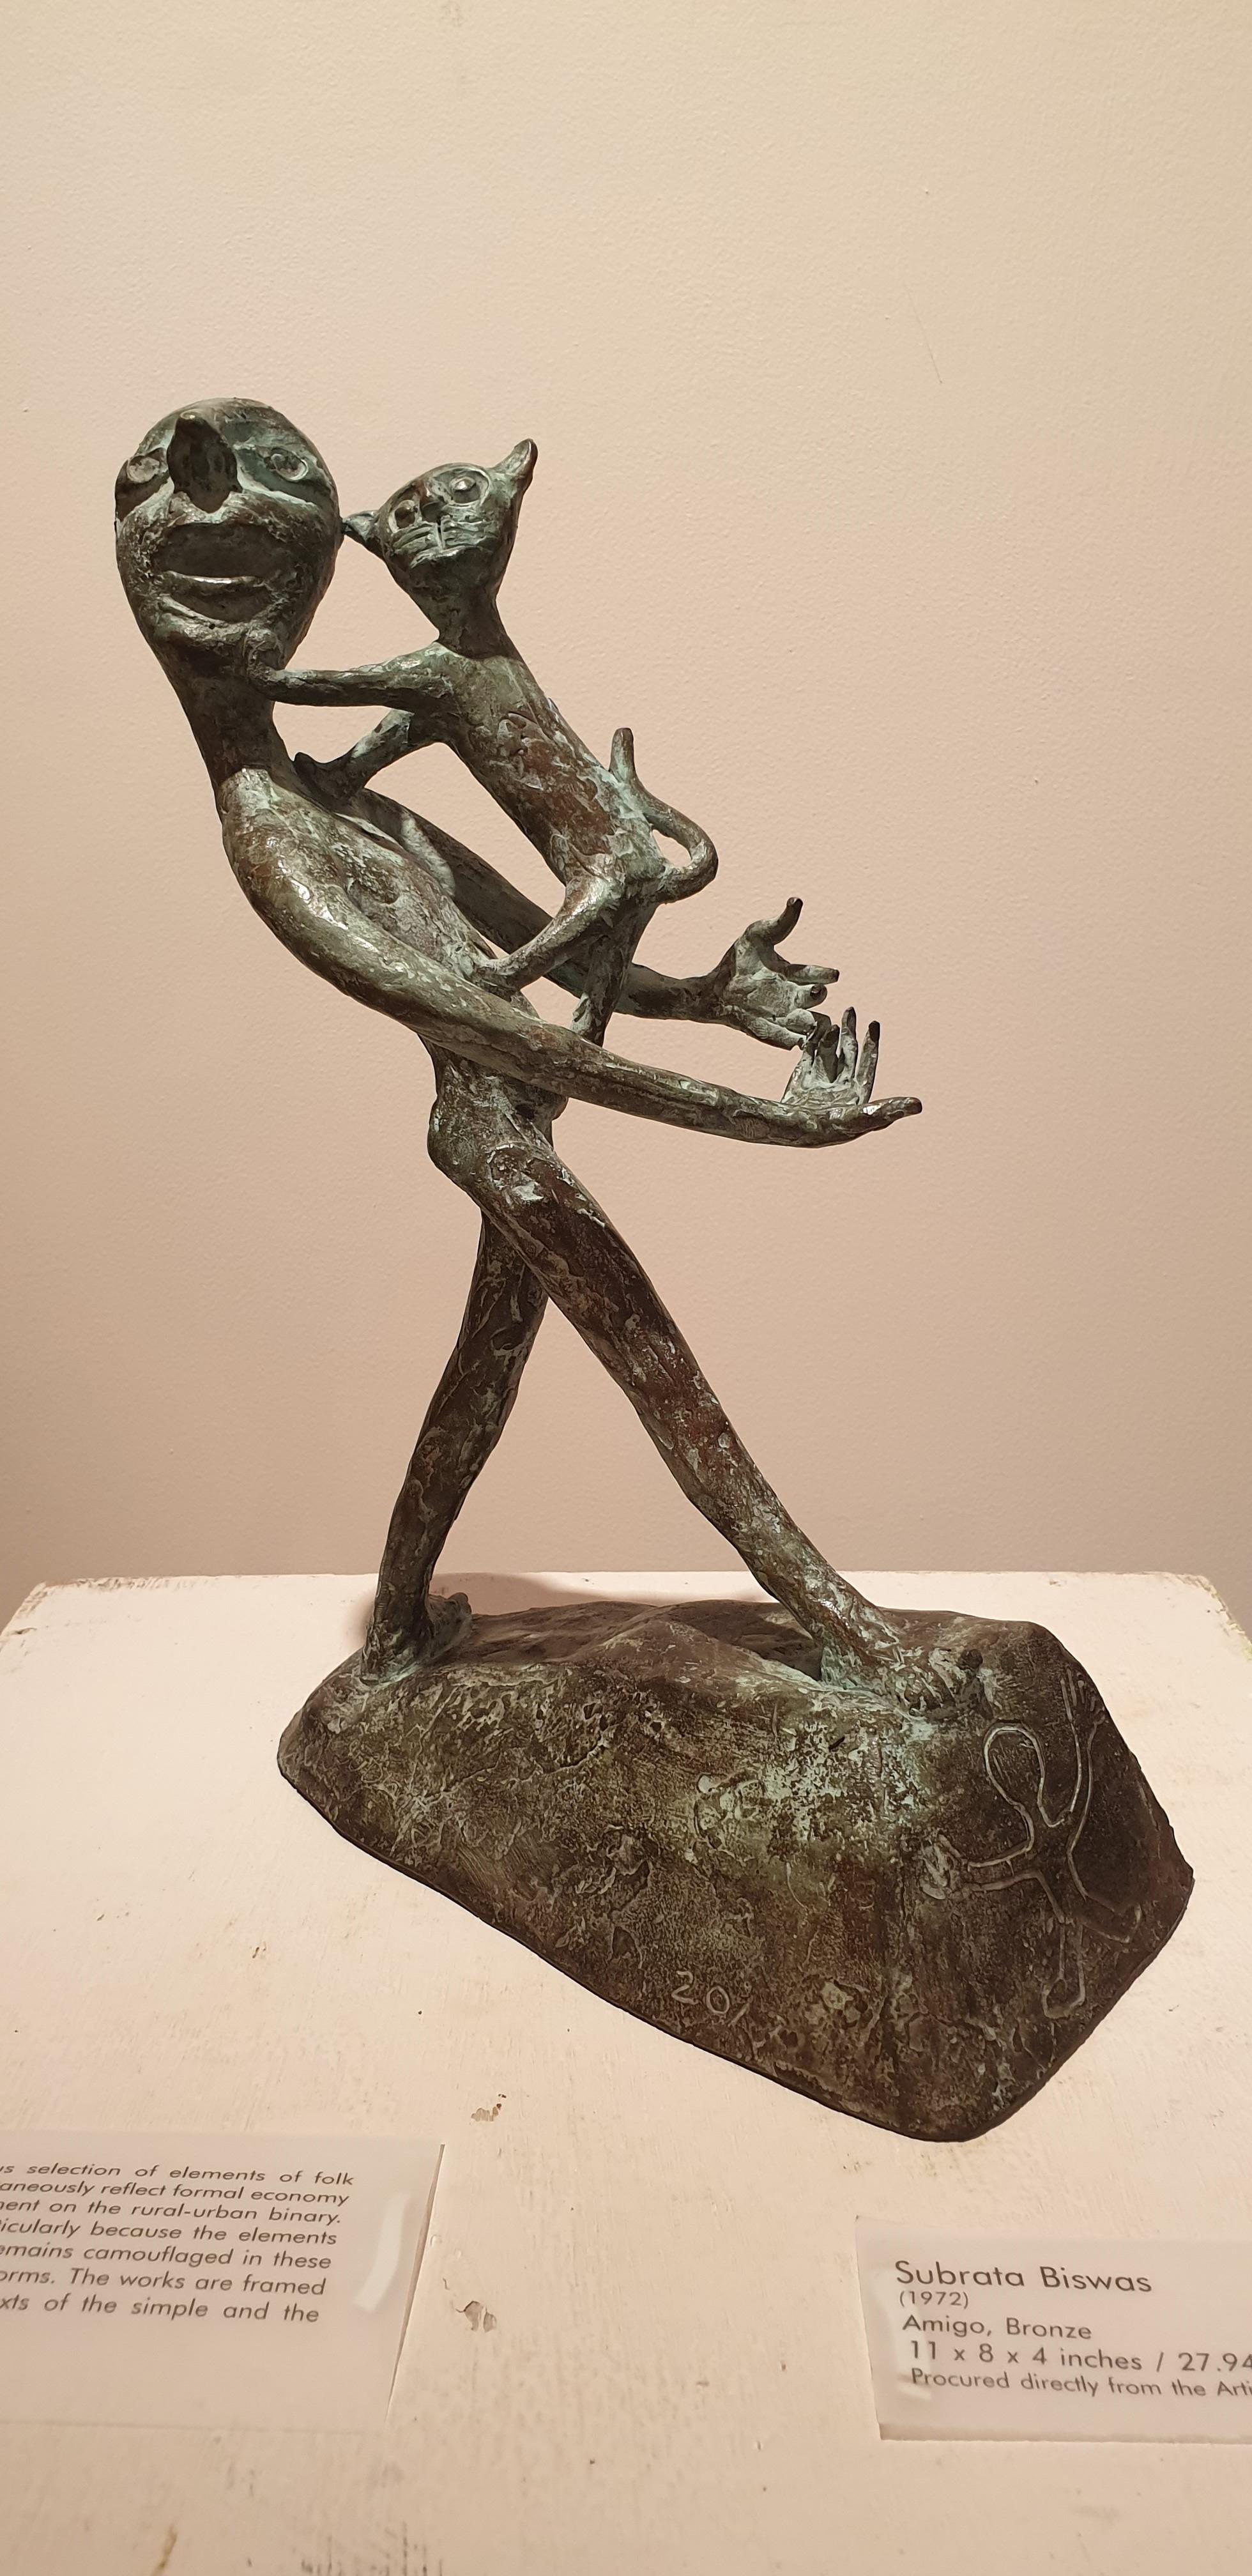 Subrata Biswas - Amigo - H: 11 Inches x W: 8 Inches X D: 4 Inches
Bronze Sculpture.

Subrata Biswas’s three sculptures ‘Think Green’, ‘Amigo’ and ‘City Bred’ a conscious selection of elements of folk forms simultaneously reflect formal economy and a